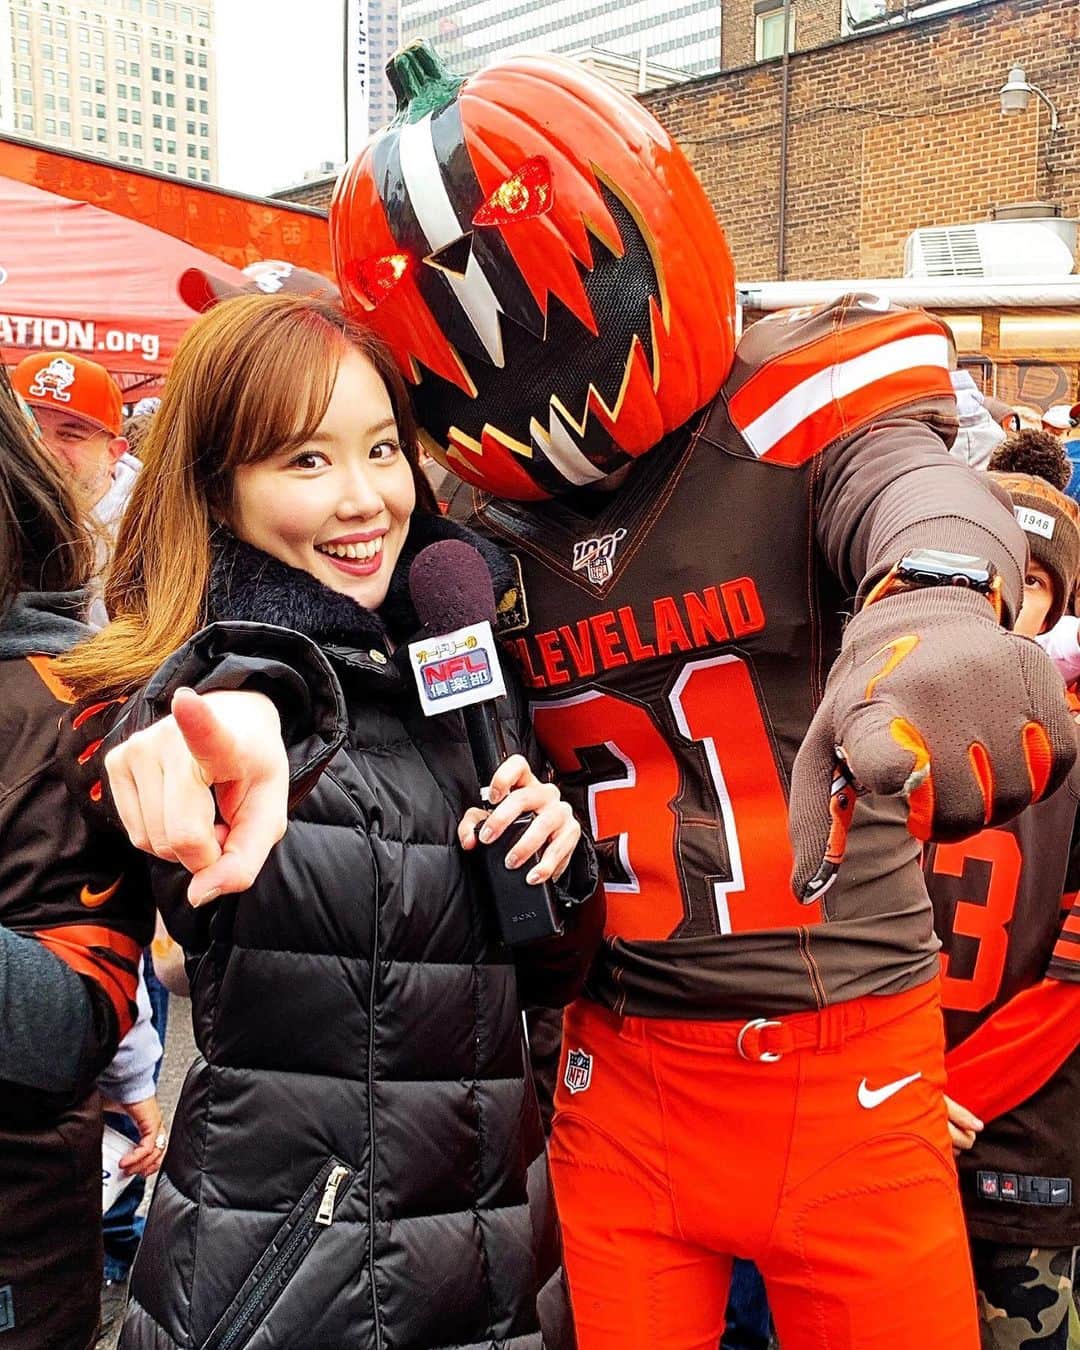 メロディー・モリタさんのインスタグラム写真 - (メロディー・モリタInstagram)「My NFL report aired across three weeks on TV in Japan!📺🎥 This time, I traveled to Cleveland to film with the one and only @pumpkinnation!!🙌✨ I was in absolute awe of the tremendous amount of love and support he had for the Browns, and the atmosphere on game day made me forget that I was there for filming because I was having such a blast😆 Thank you SO much to everyone who was a part of this! You guys were all so kind and welcoming!!🙏 There's also just one Japanese coach in the entire NFL, and I conducted a one-on-one interview with him! It's always great to hear other peoples' journeys on how they got to where they are today + some BTS episodes with the team & players.🏈 I can't believe how fast this year has gone by... Super Bowl is going to be here in no time😱 really looking forward to a lot of exciting things coming up soon next year!!⭐️ * 「オードリーのNFL倶楽部」では、３週に渡りメロディーモリタのNFL現地リポートがオンエアされました!!✨ * 今回訪れたのは、ブラウンズが拠点とするクリーブランド。NFLには各チームに名物ファンがいますが、街の人々にも選手にも深く愛されている有名なPumpkinheadさんに密着取材をさせていただきました！隅から隅までブラウンズ一色のご自宅訪問、巨大トレーラー、試合当日の大盛り上がりパーティーの様子まで💡ファンの皆さんが本当に温かく迎え入れて下さり、私も撮影であることをすっかり忘れて久しぶりのブラウンズの勝利に大興奮でした！😃 * そしてブラウンズには、NFLで唯一の日本人コーチもいらっしゃるんです！NFLに携わることになったきっかけ、選手やチーム内の事情など、インタビューを通して貴重なお話をたくさん聞かせていただきました。 * NFLは、これからスーパーボウルに向けて更に更に盛り上がります。今期はどんな感動が待っているのか、今からドキドキ楽しみです‼️ #NFL #NFLClub #pumpkinhead #pumpkinnation #thankyou」12月30日 6時59分 - melodeemorita